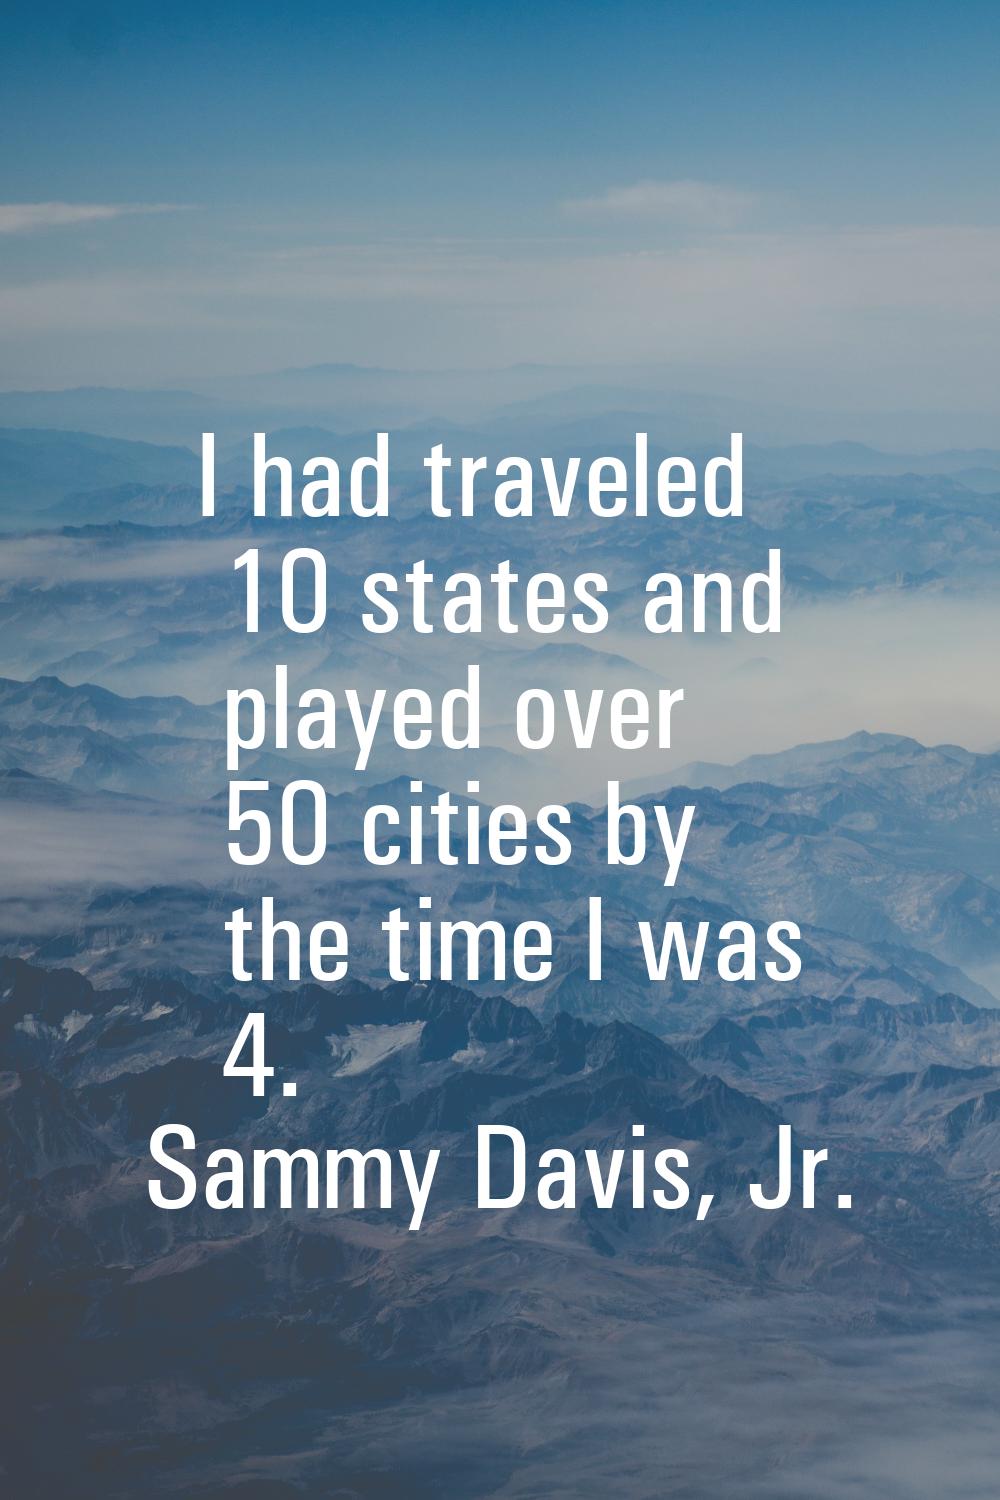 I had traveled 10 states and played over 50 cities by the time I was 4.